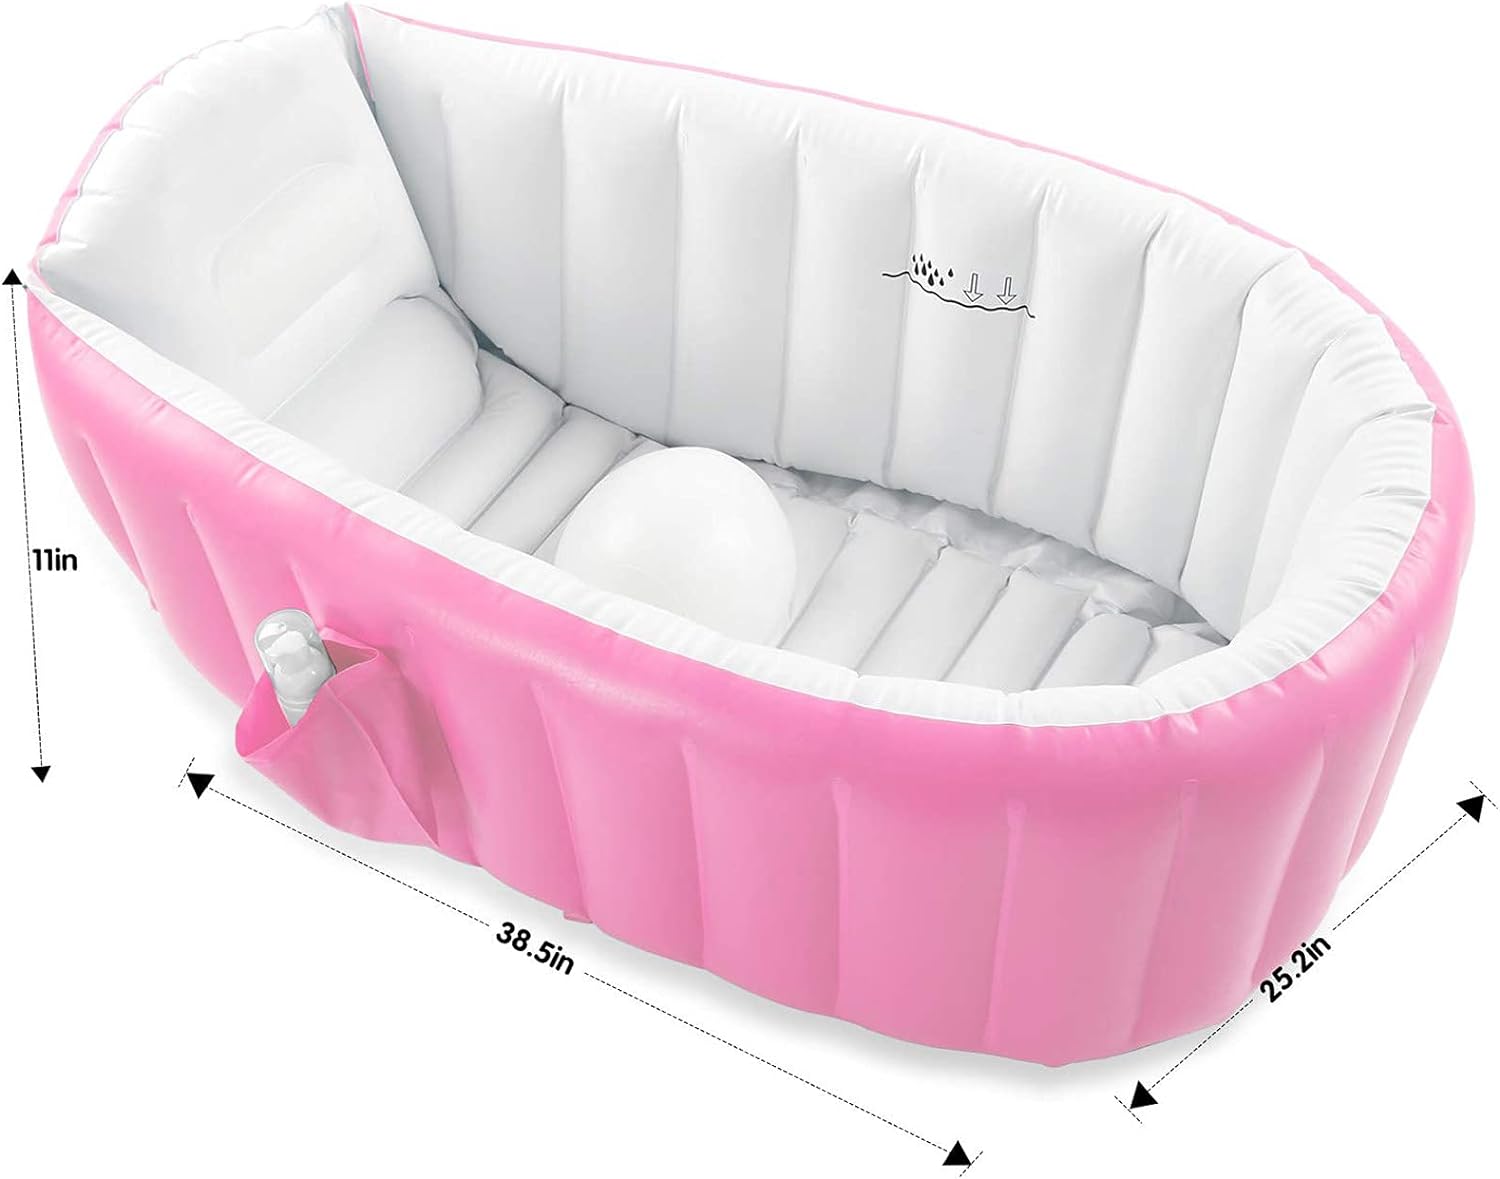 UUHOME Baby Inflatable Bathtub, Portable Infant Toddler Bathing Tub Non Slip Travel Bathtub Mini Air Swimming Pool Kids Thick Foldable Shower Basin with Air Pump (Pink)